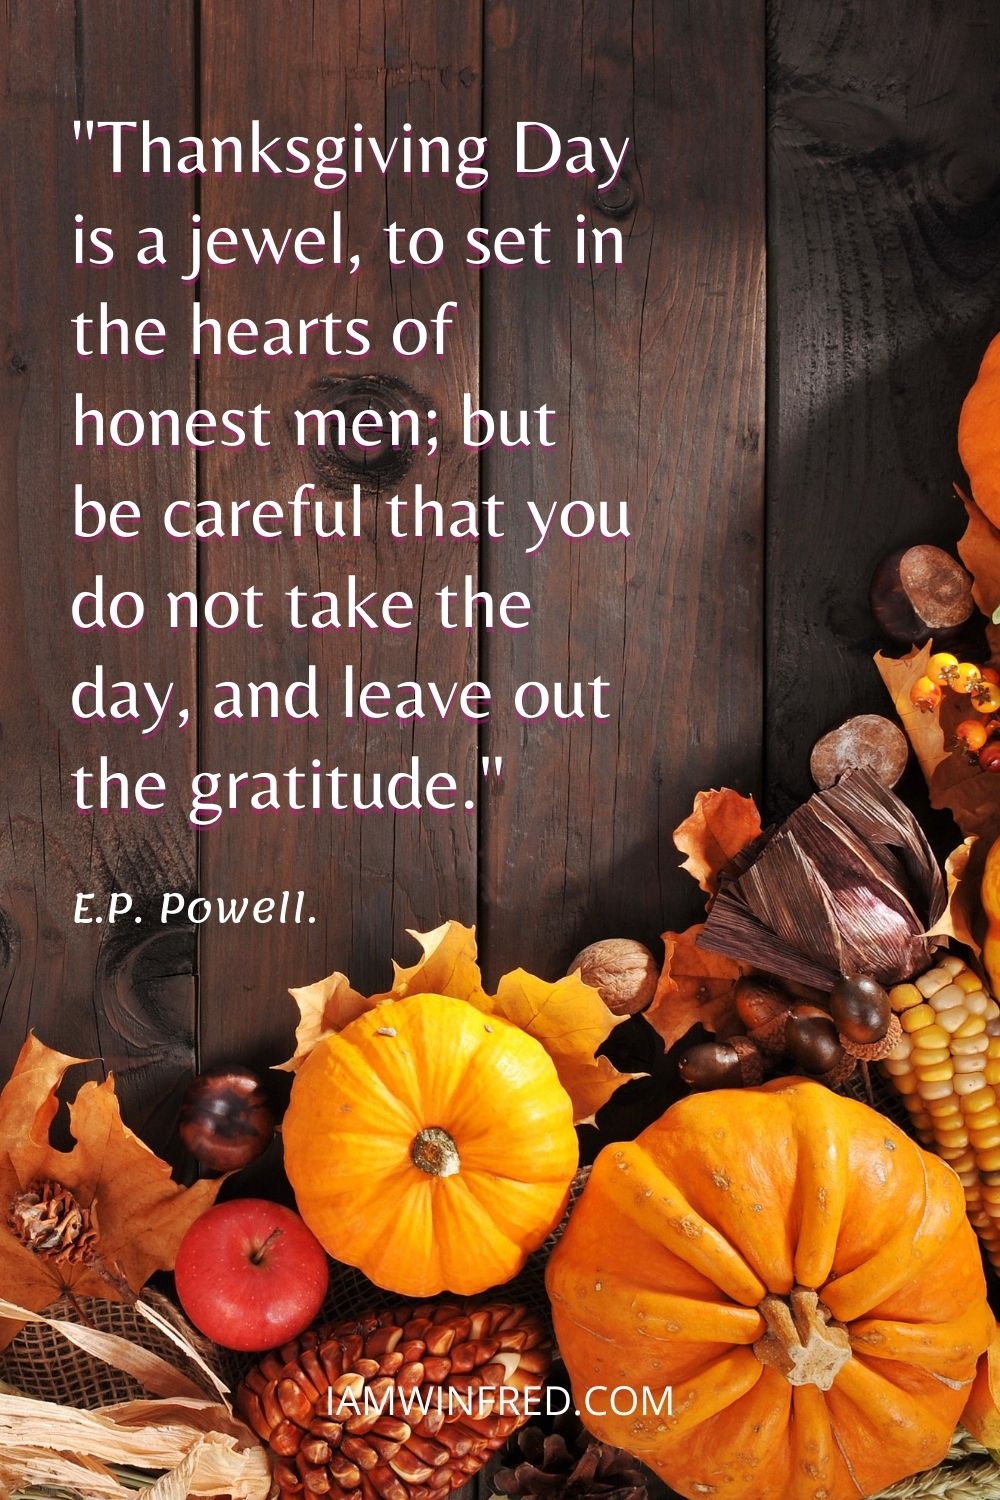 Thanksgiving Day Is A Jewel To Set In The Hearts Of Honest Men But Be Careful That You Do Not Take The Day And Leave Out The Gratitude.